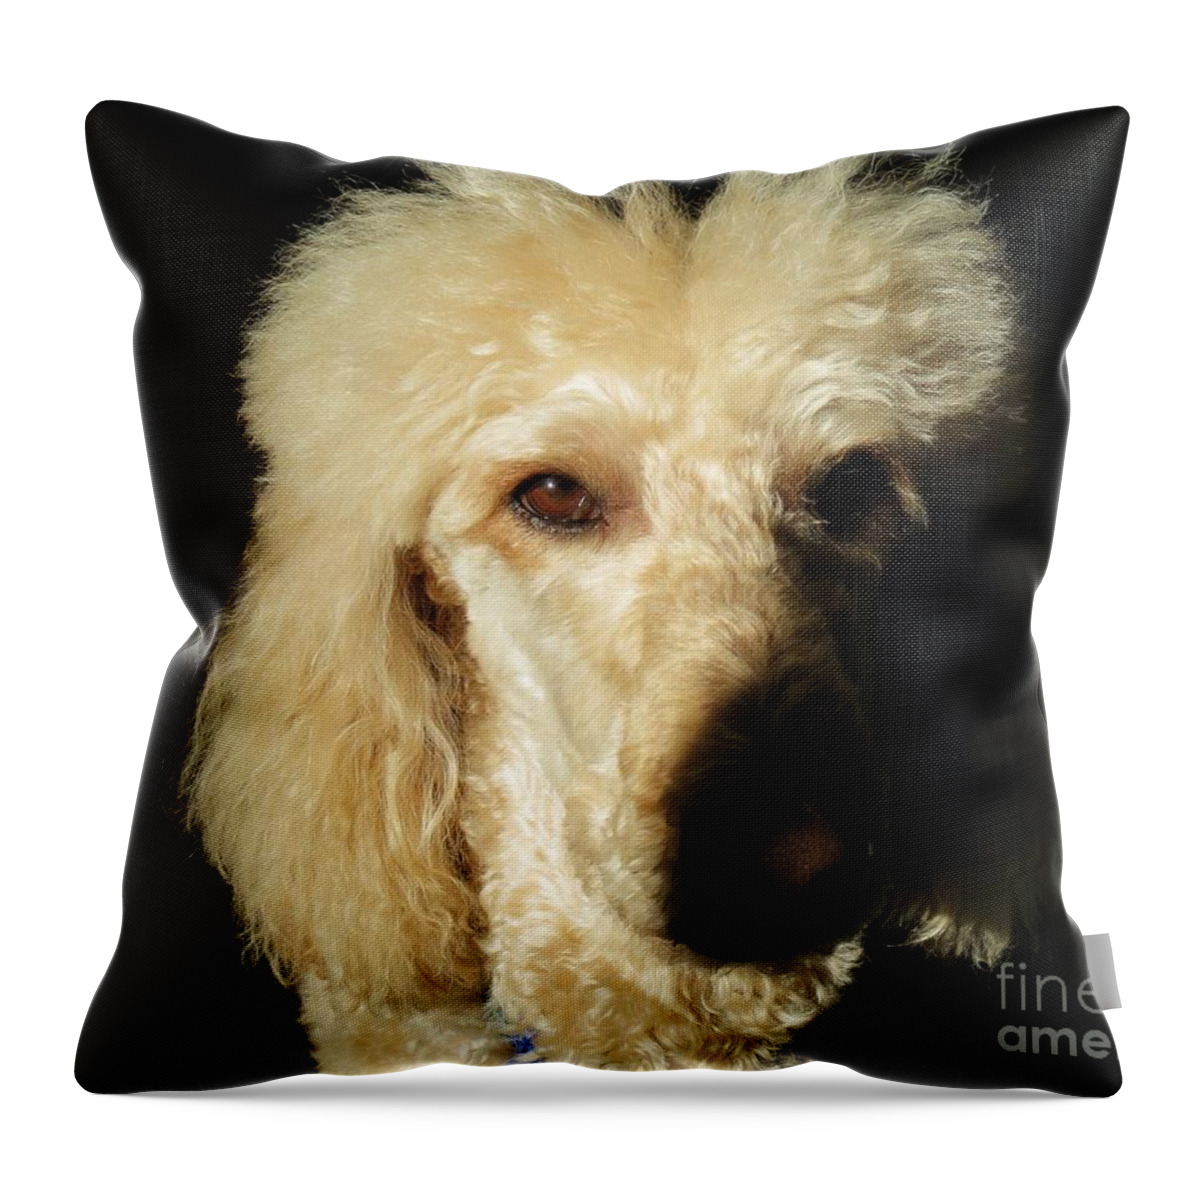 Standard Poodle Throw Pillow featuring the photograph Standard Poodle by Judy Via-Wolff